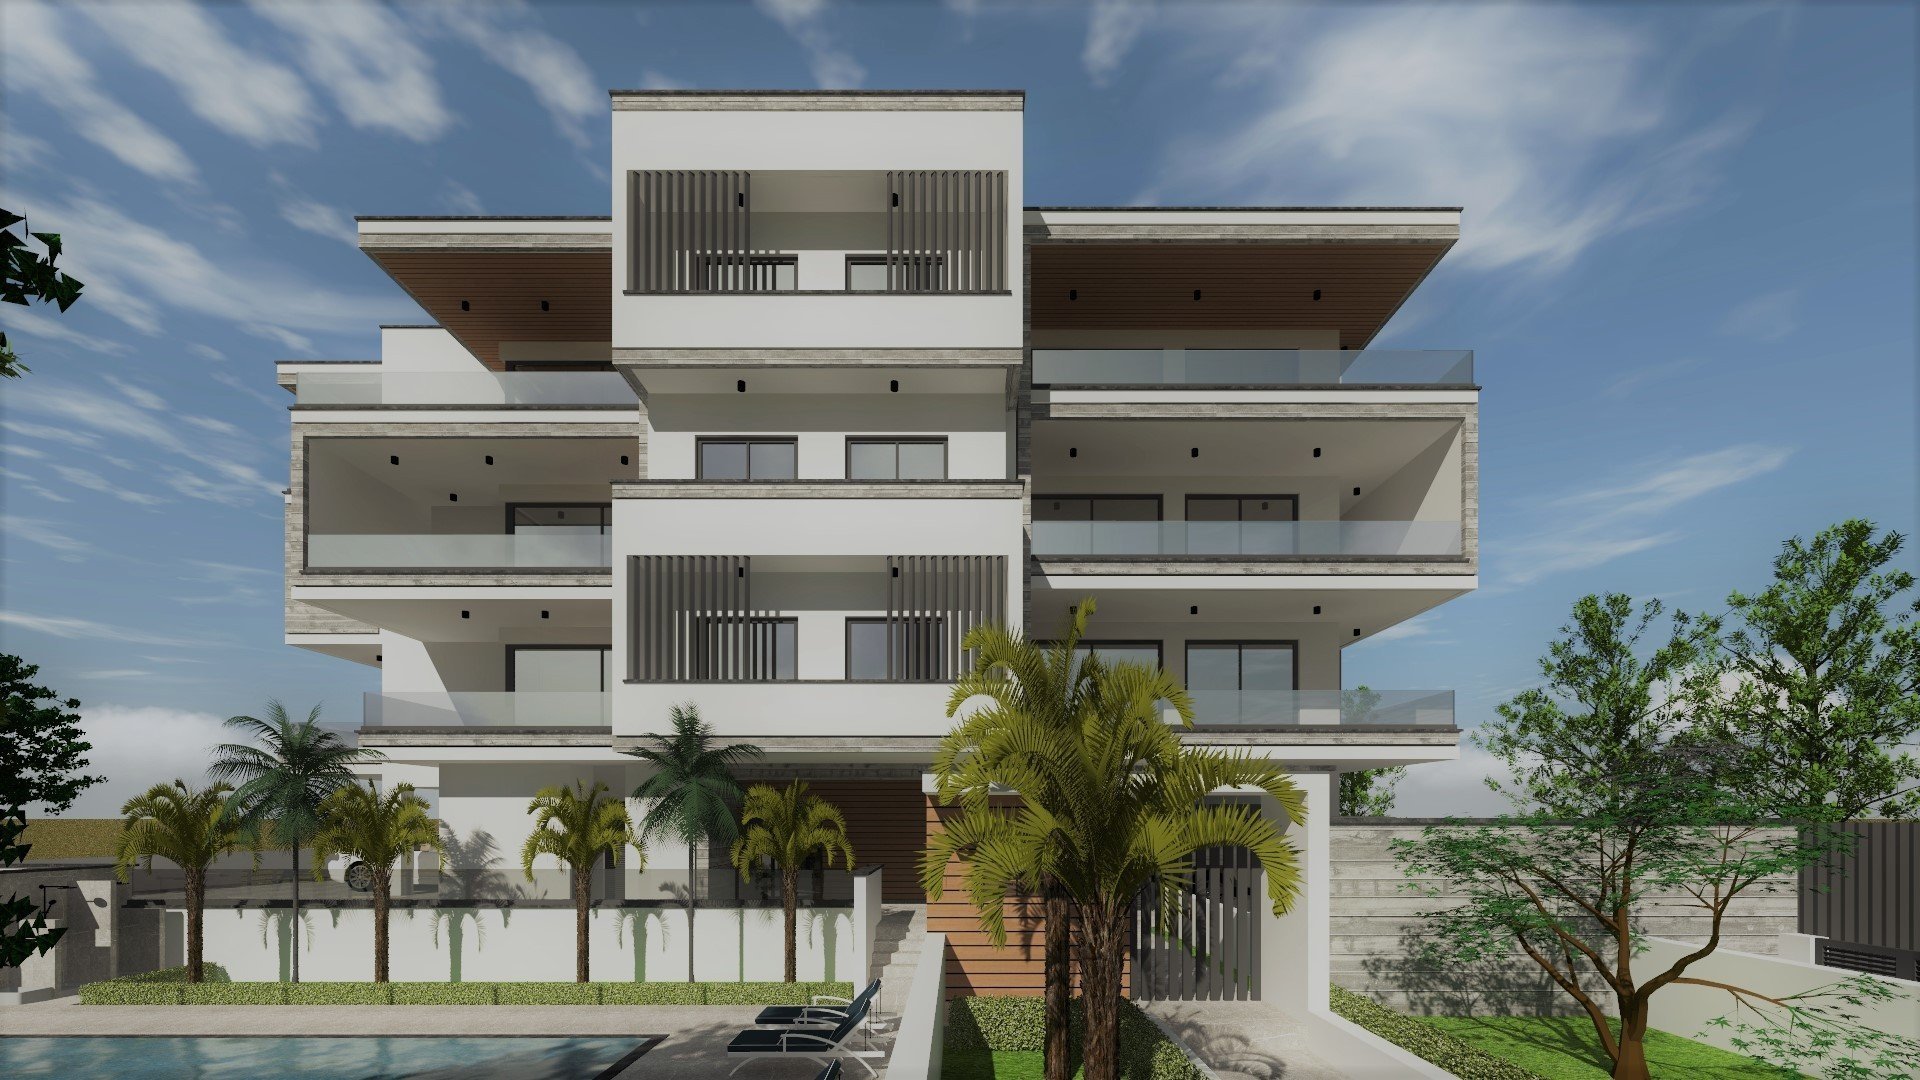 3 Bedroom Apartment for Sale in Mesovounia, Limassol District